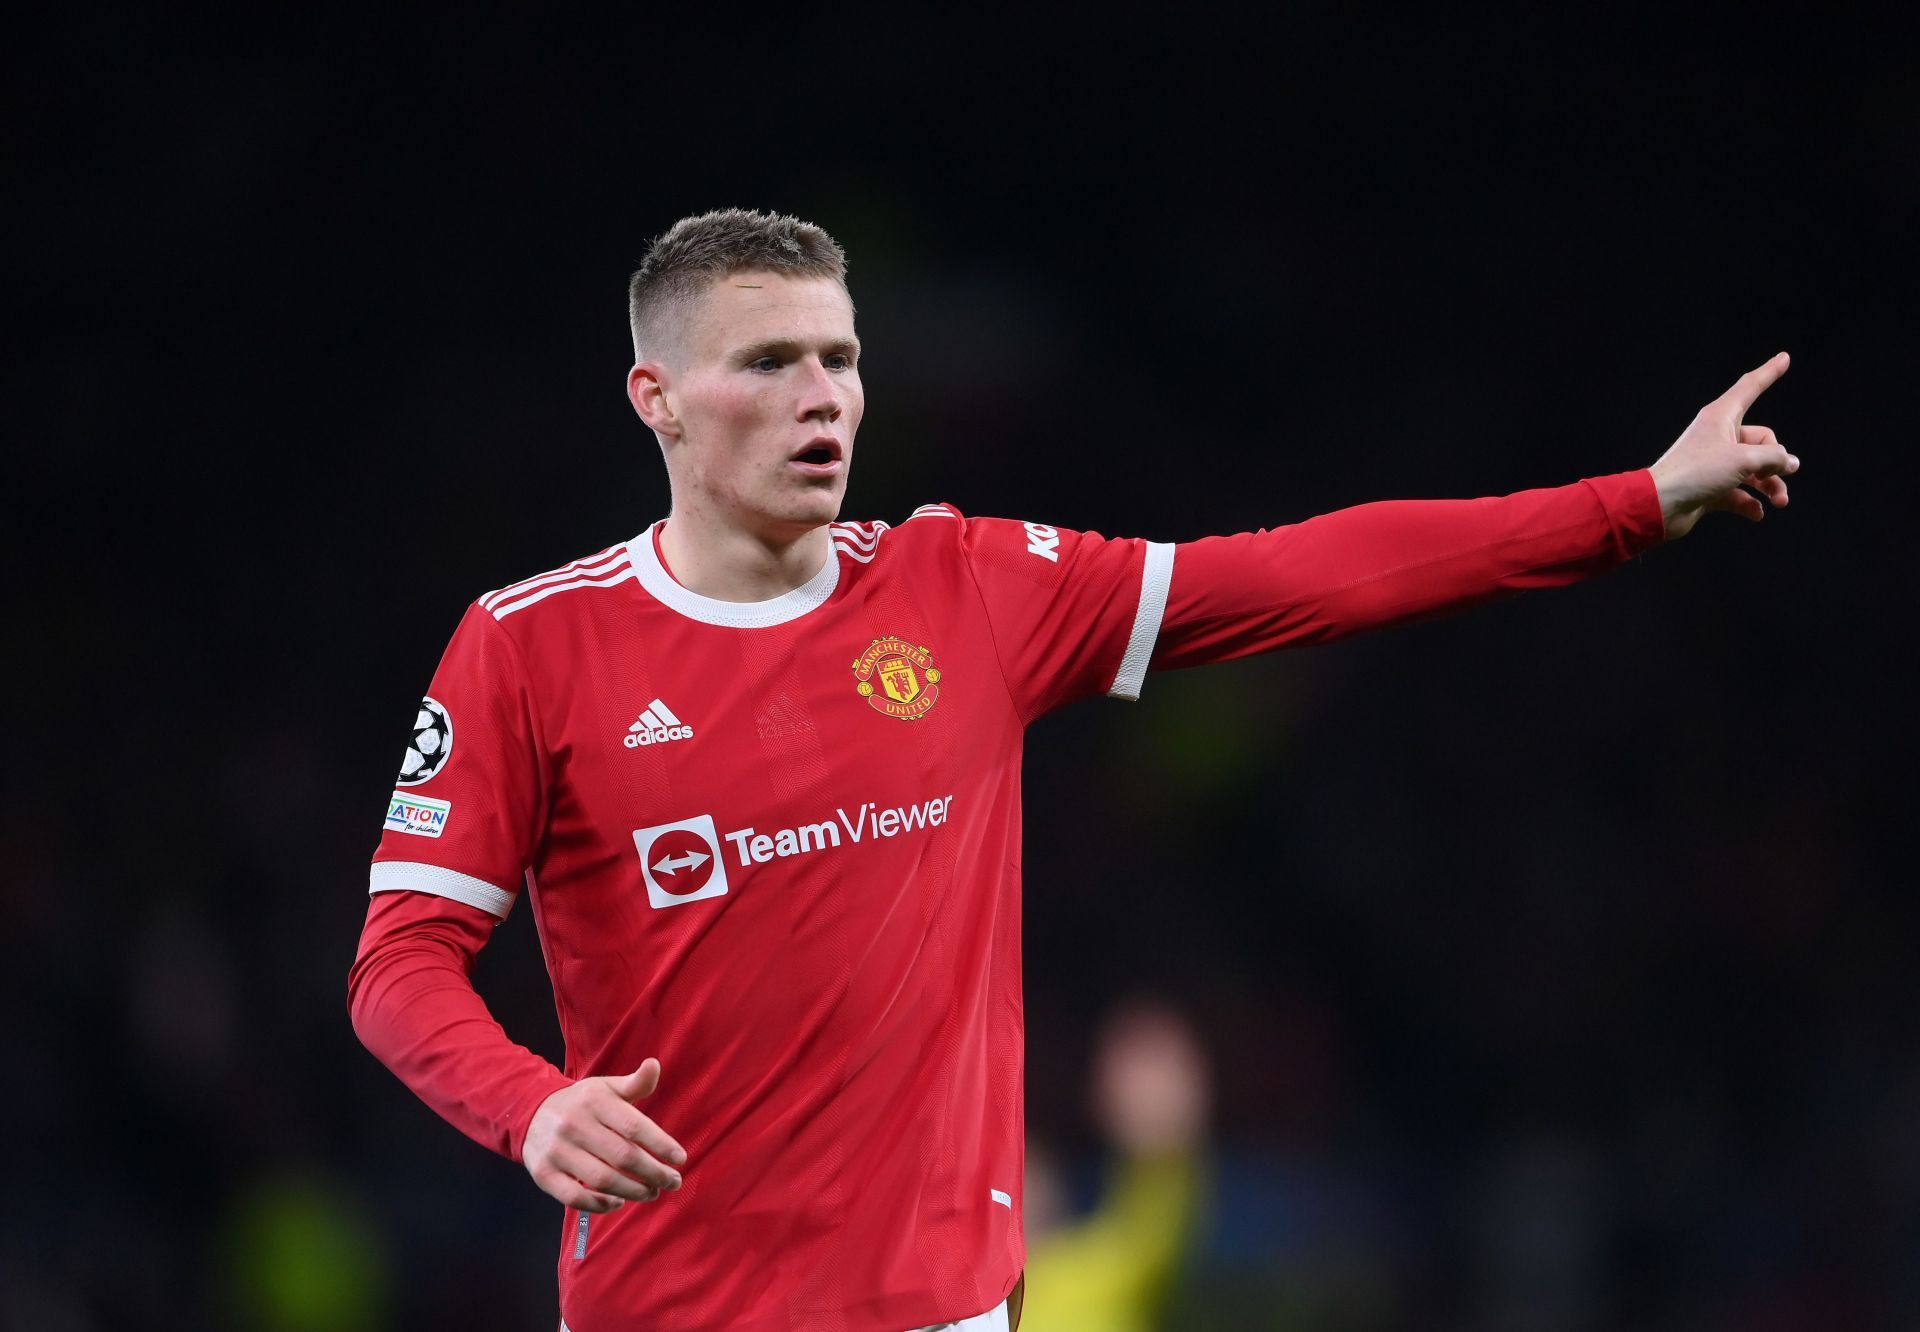 Scott McTominay came up the ranks at Manchester United